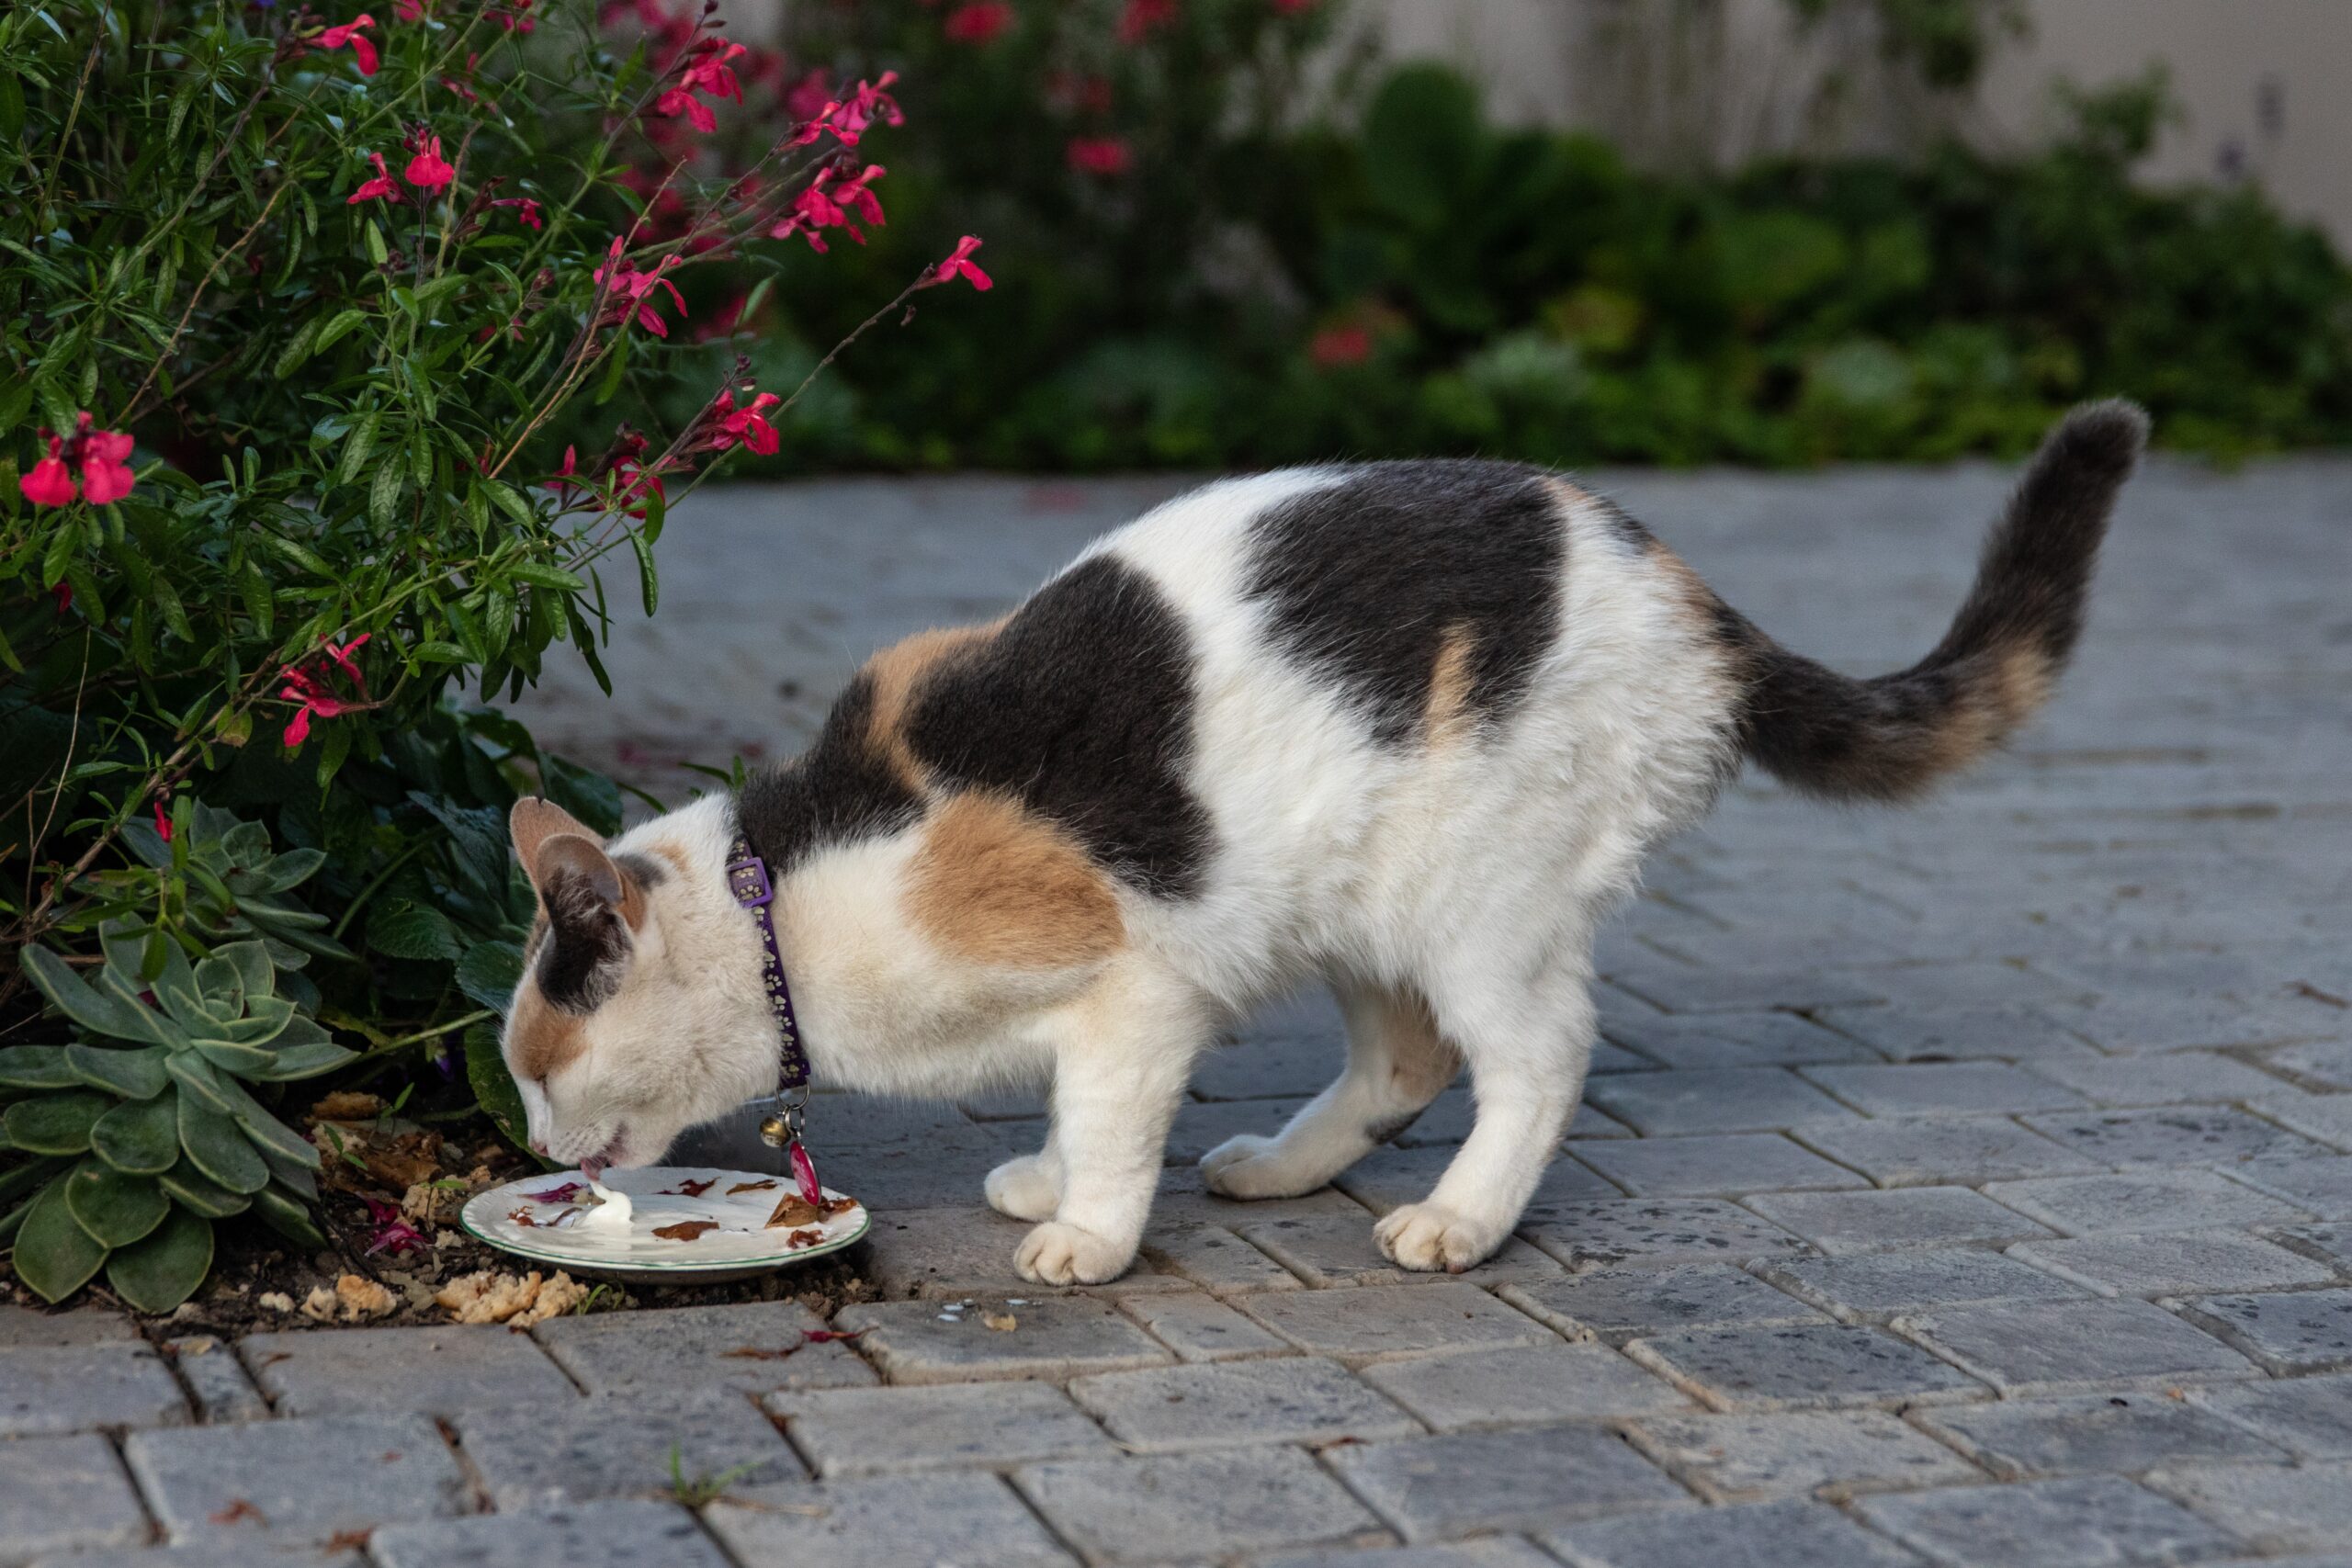 Why My Cat Is Not Eating, and What Can I Do About It